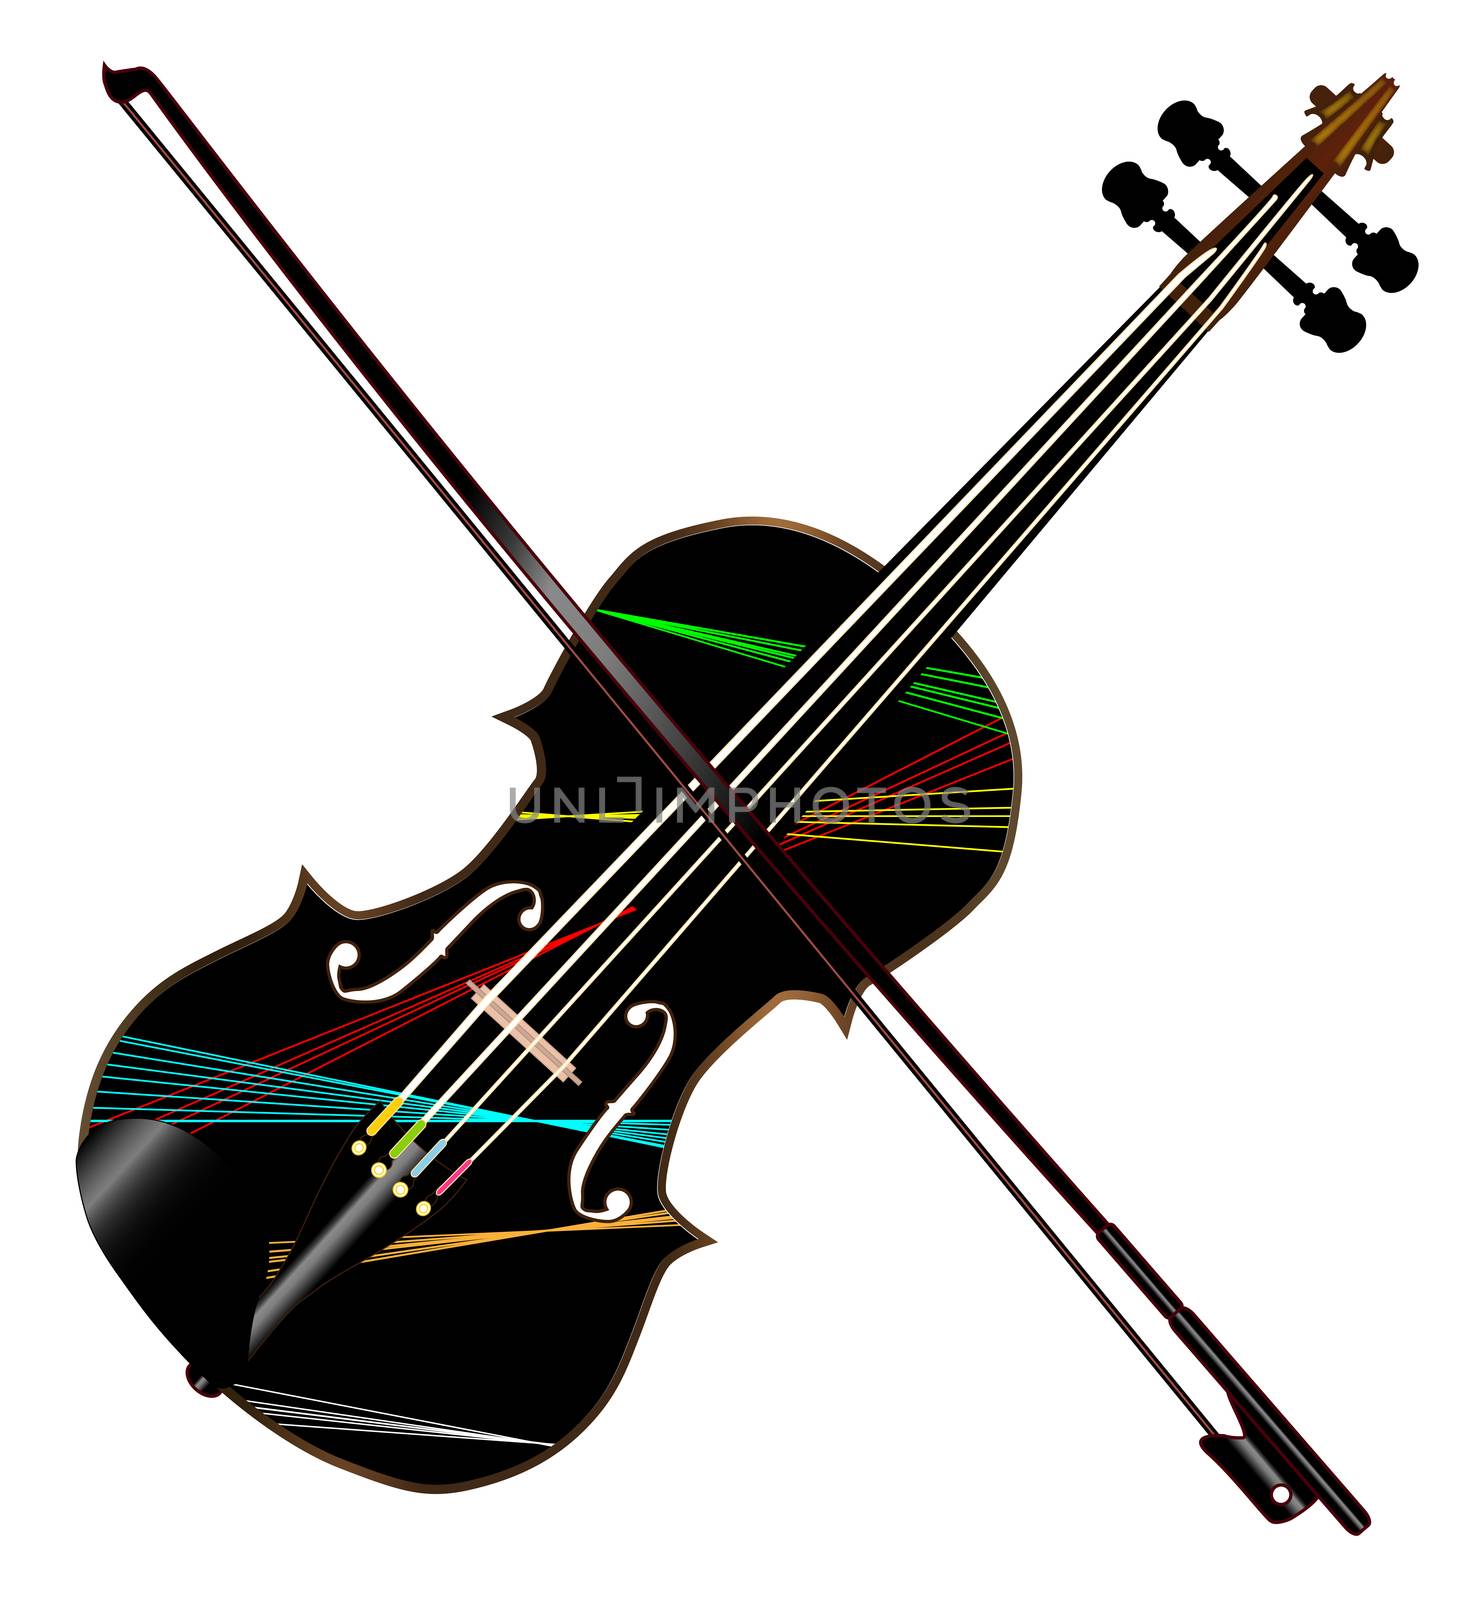 A typical violin with lazer light pattern with bow isolated over a white background